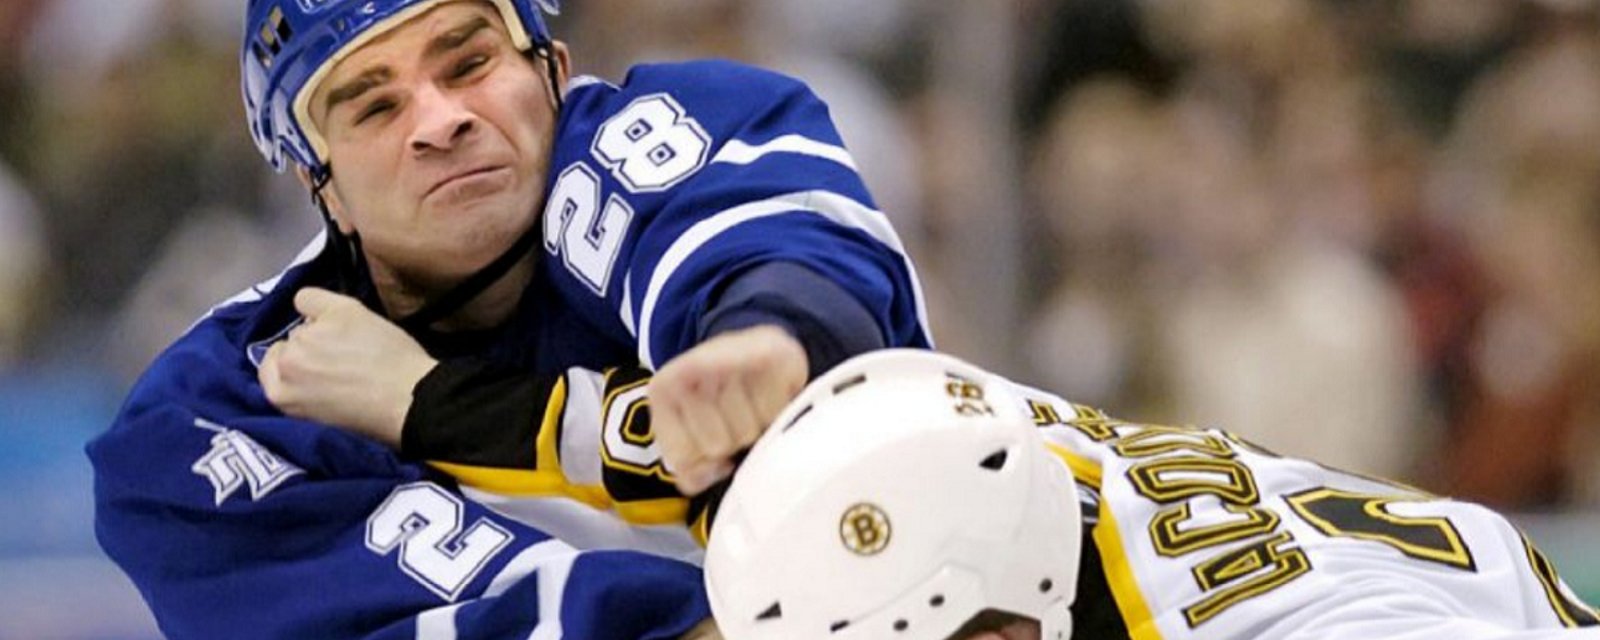 Tie Domi fires back at Georges Laraque over Reaves comments.